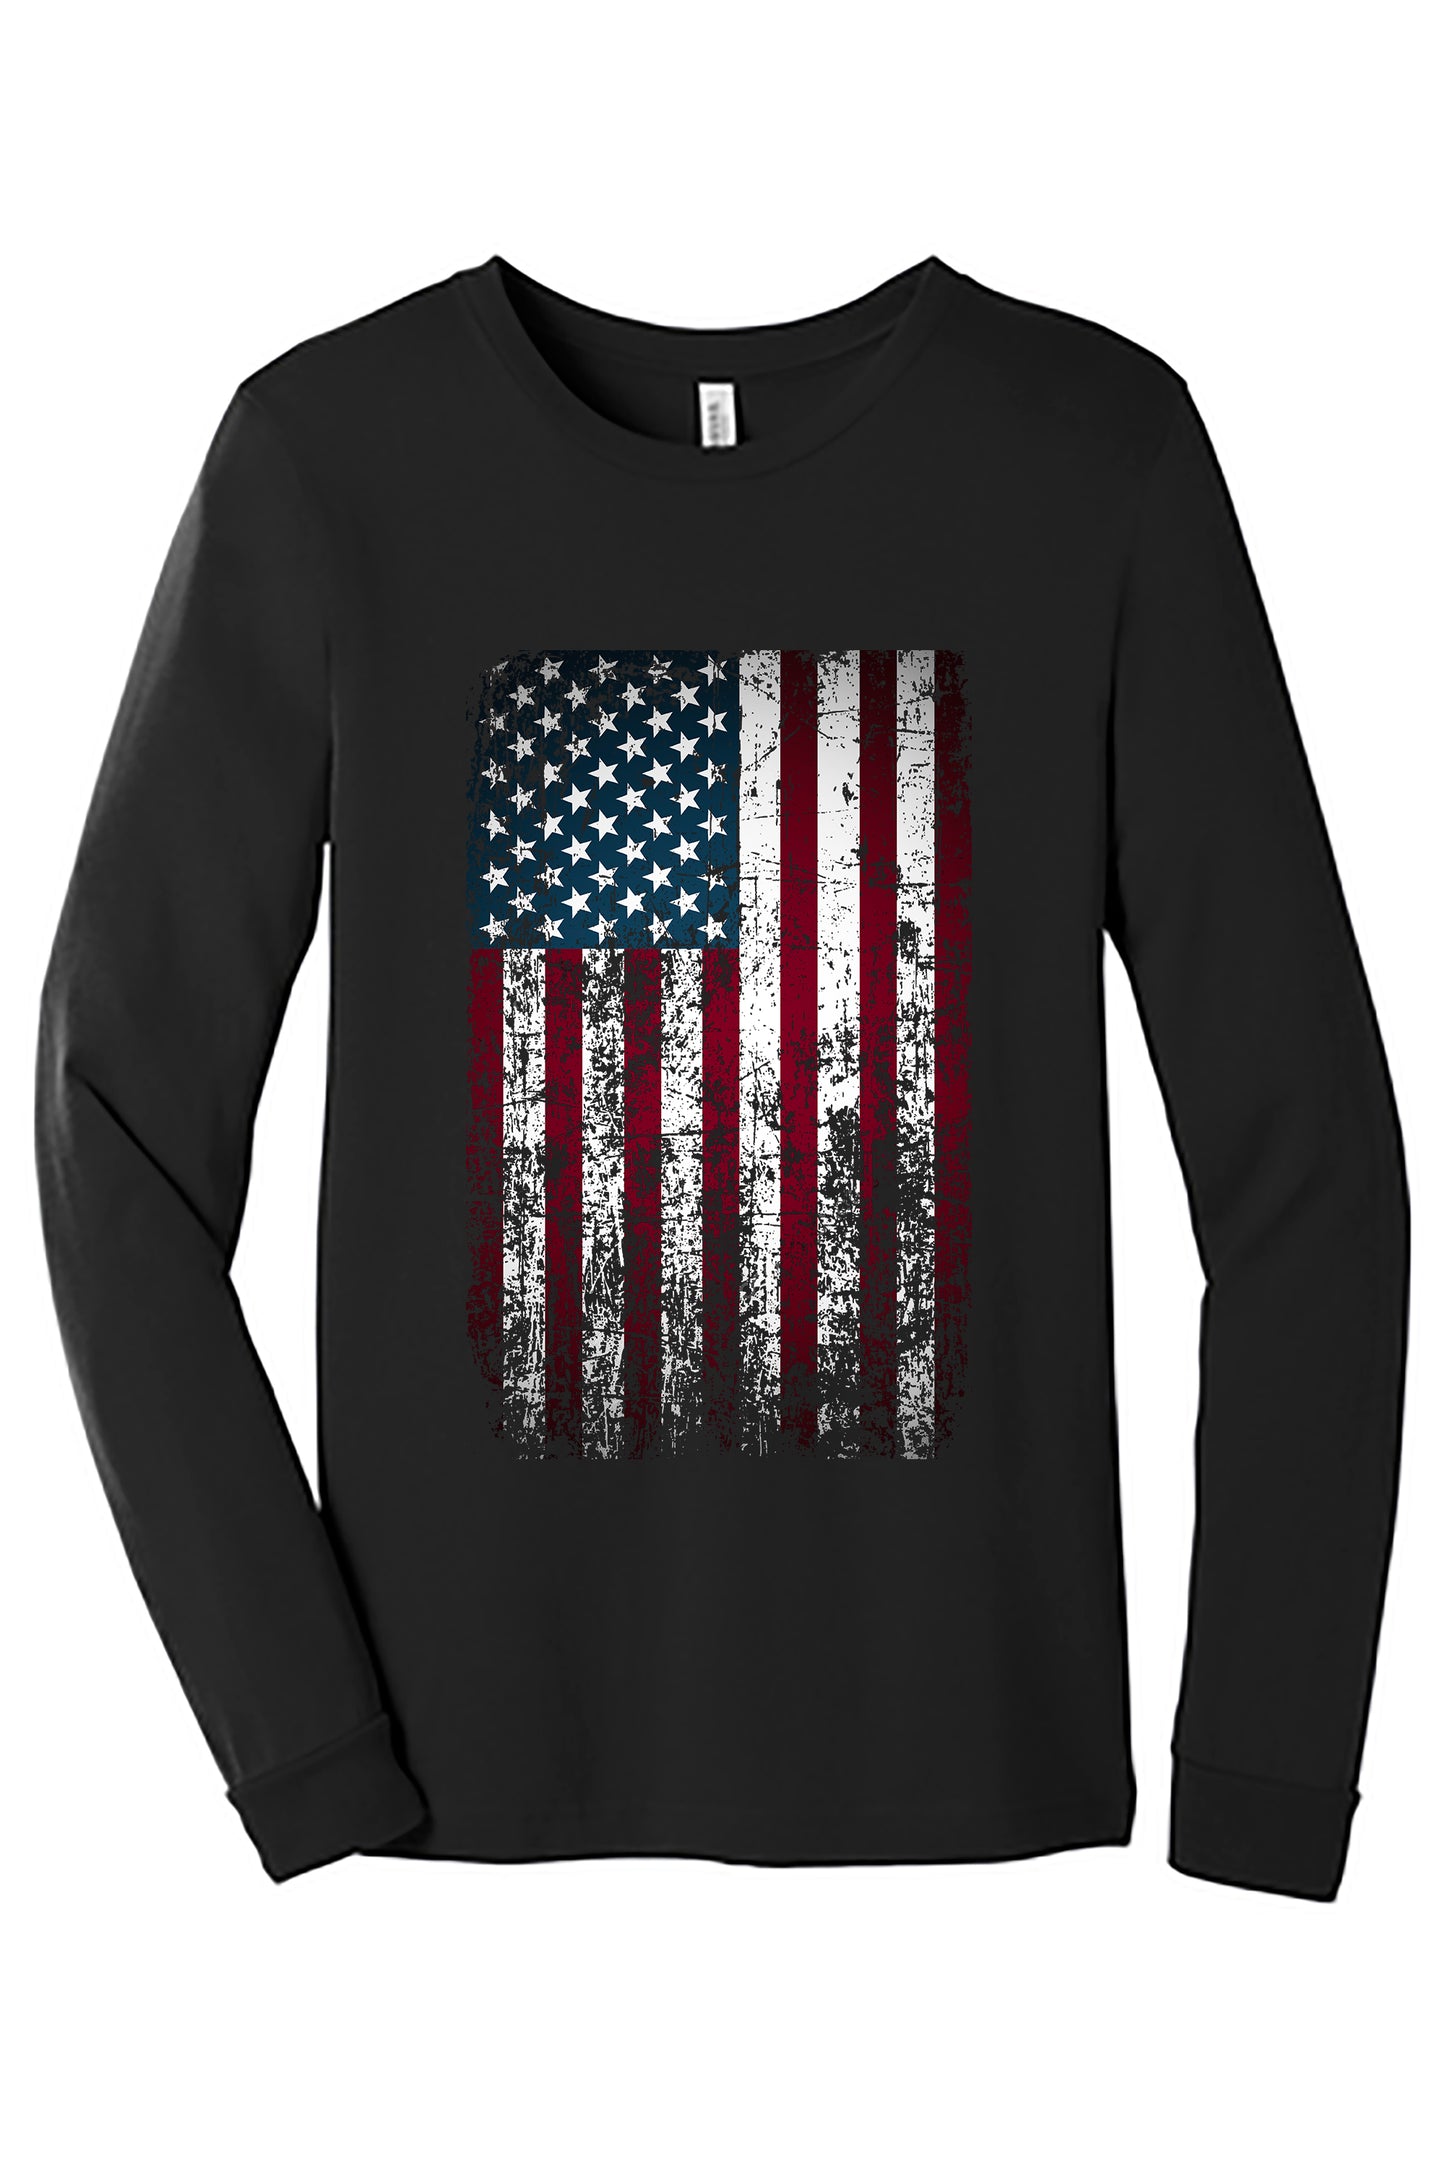 A Place to Remember® Patriotic Unisex Jersey Tee